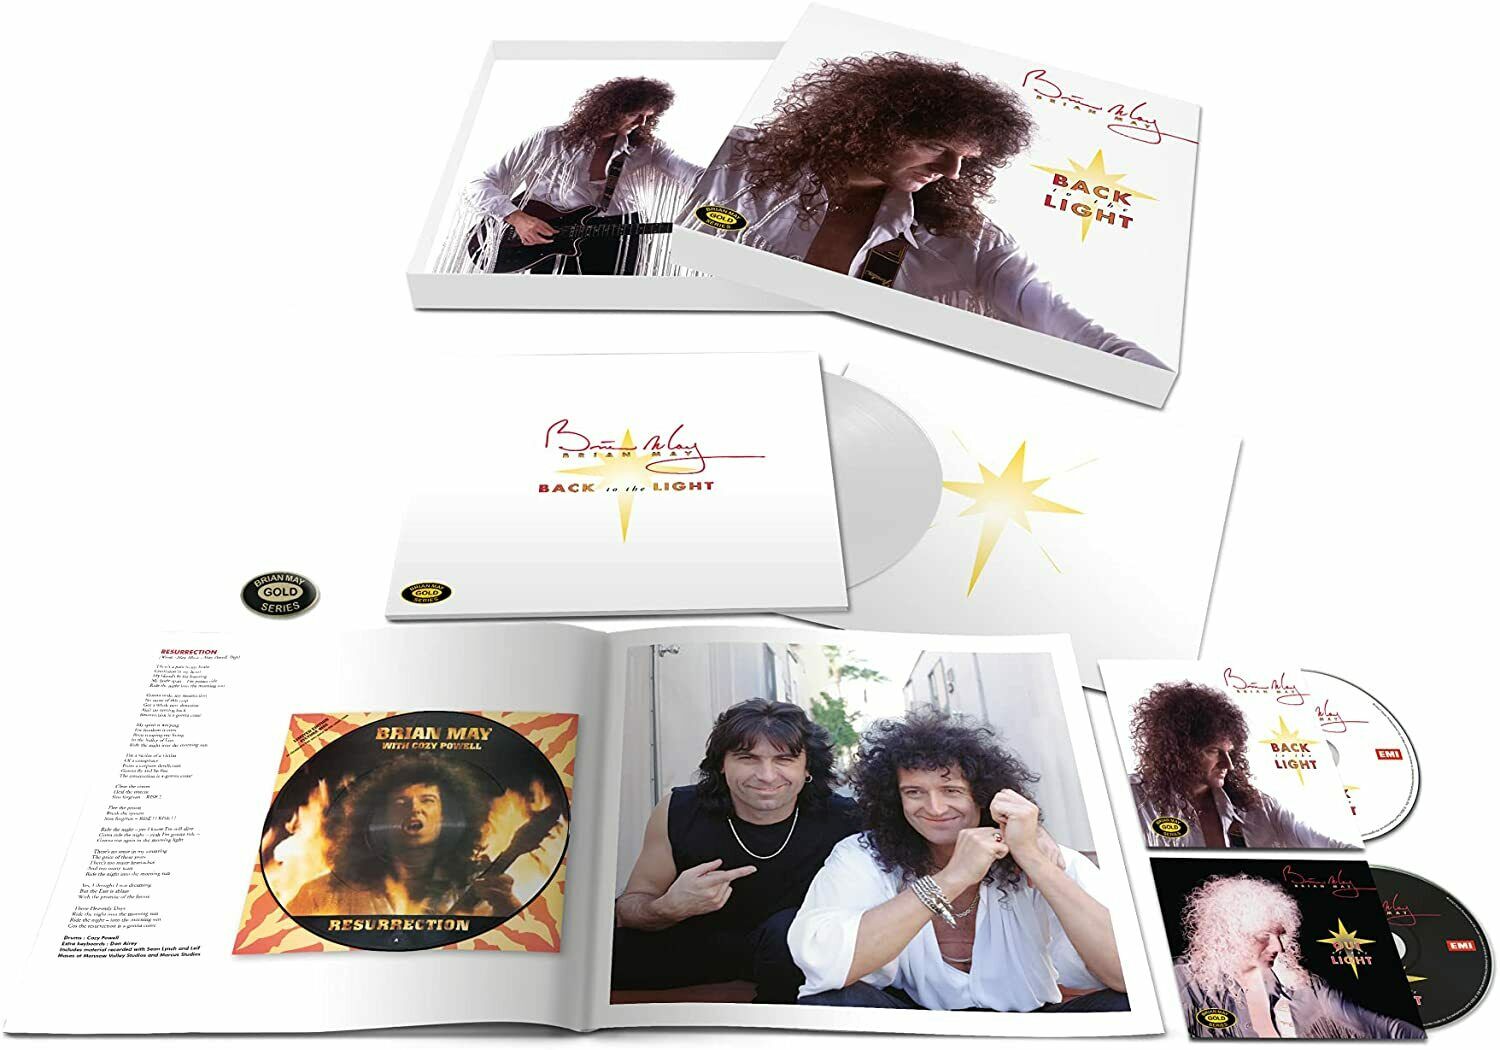 Поп UMC/Virgin Brian May - Back To The Light (Coloured Vinyl) kts electric head massager octopus scalp massage music 5 modes 14 vibrating contacts red light therapy for relax stress relief